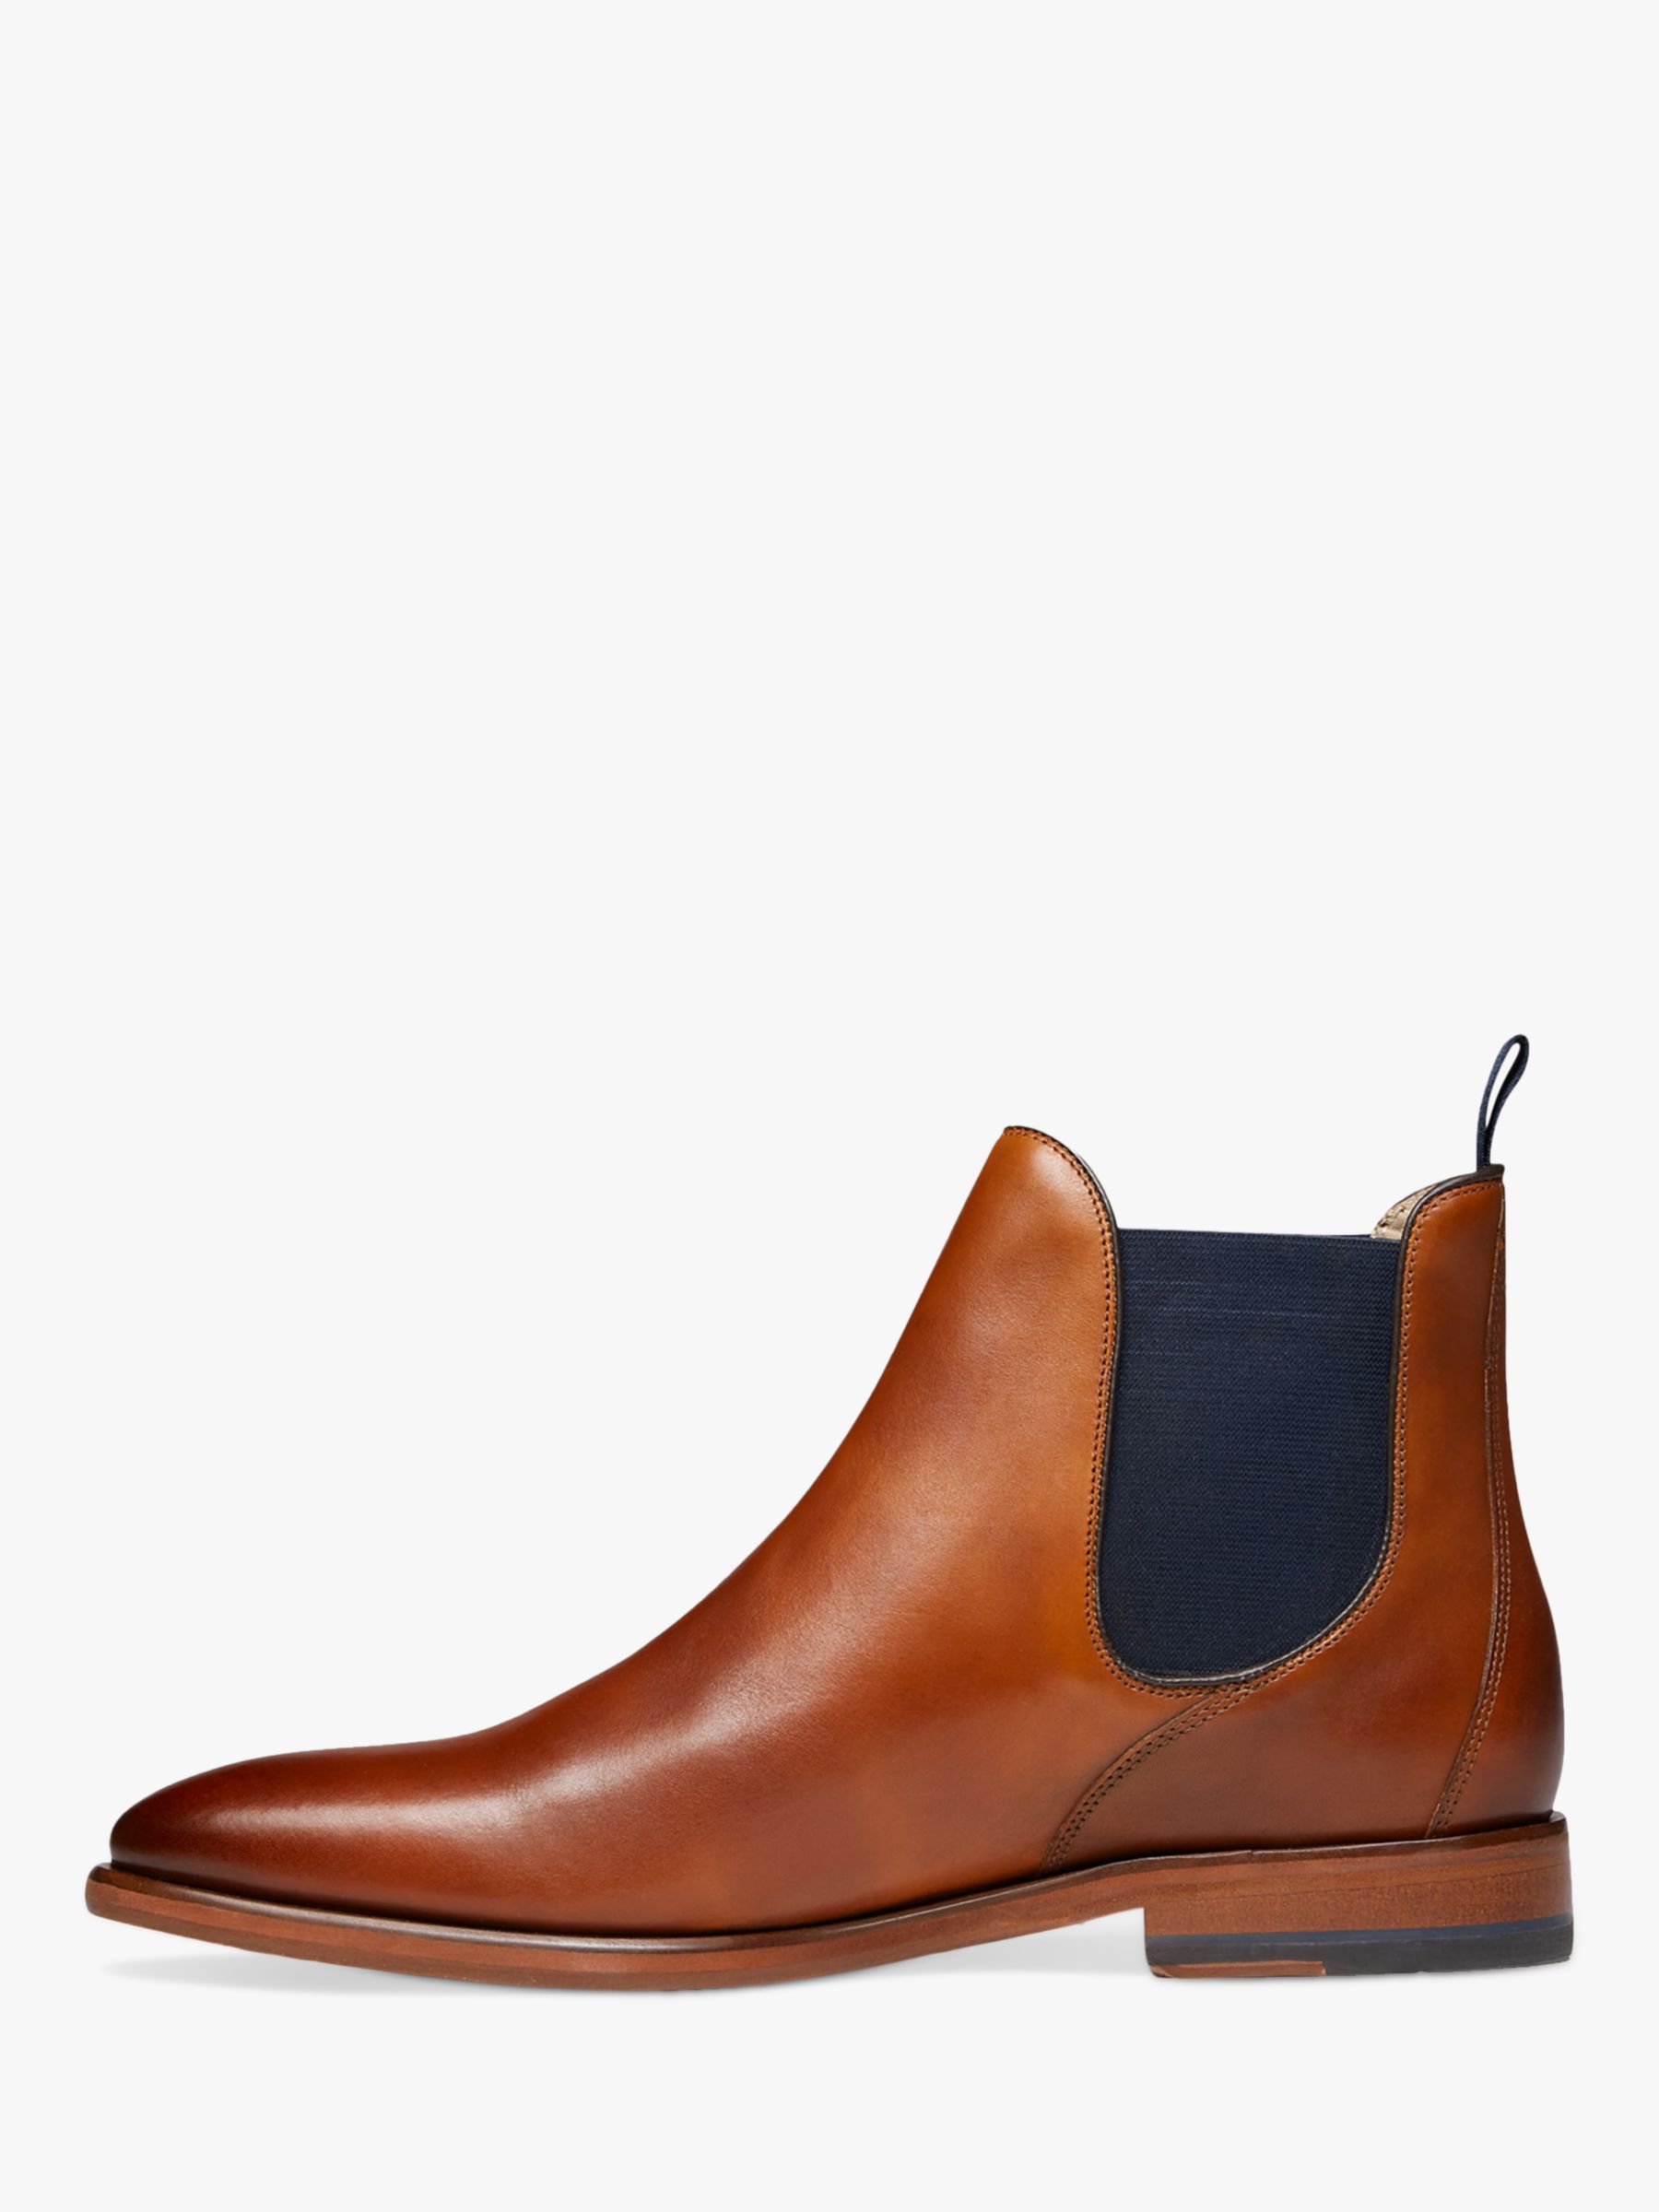 Oliver Sweeney Allegro Chelsea Boots, Tan at John Lewis & Partners